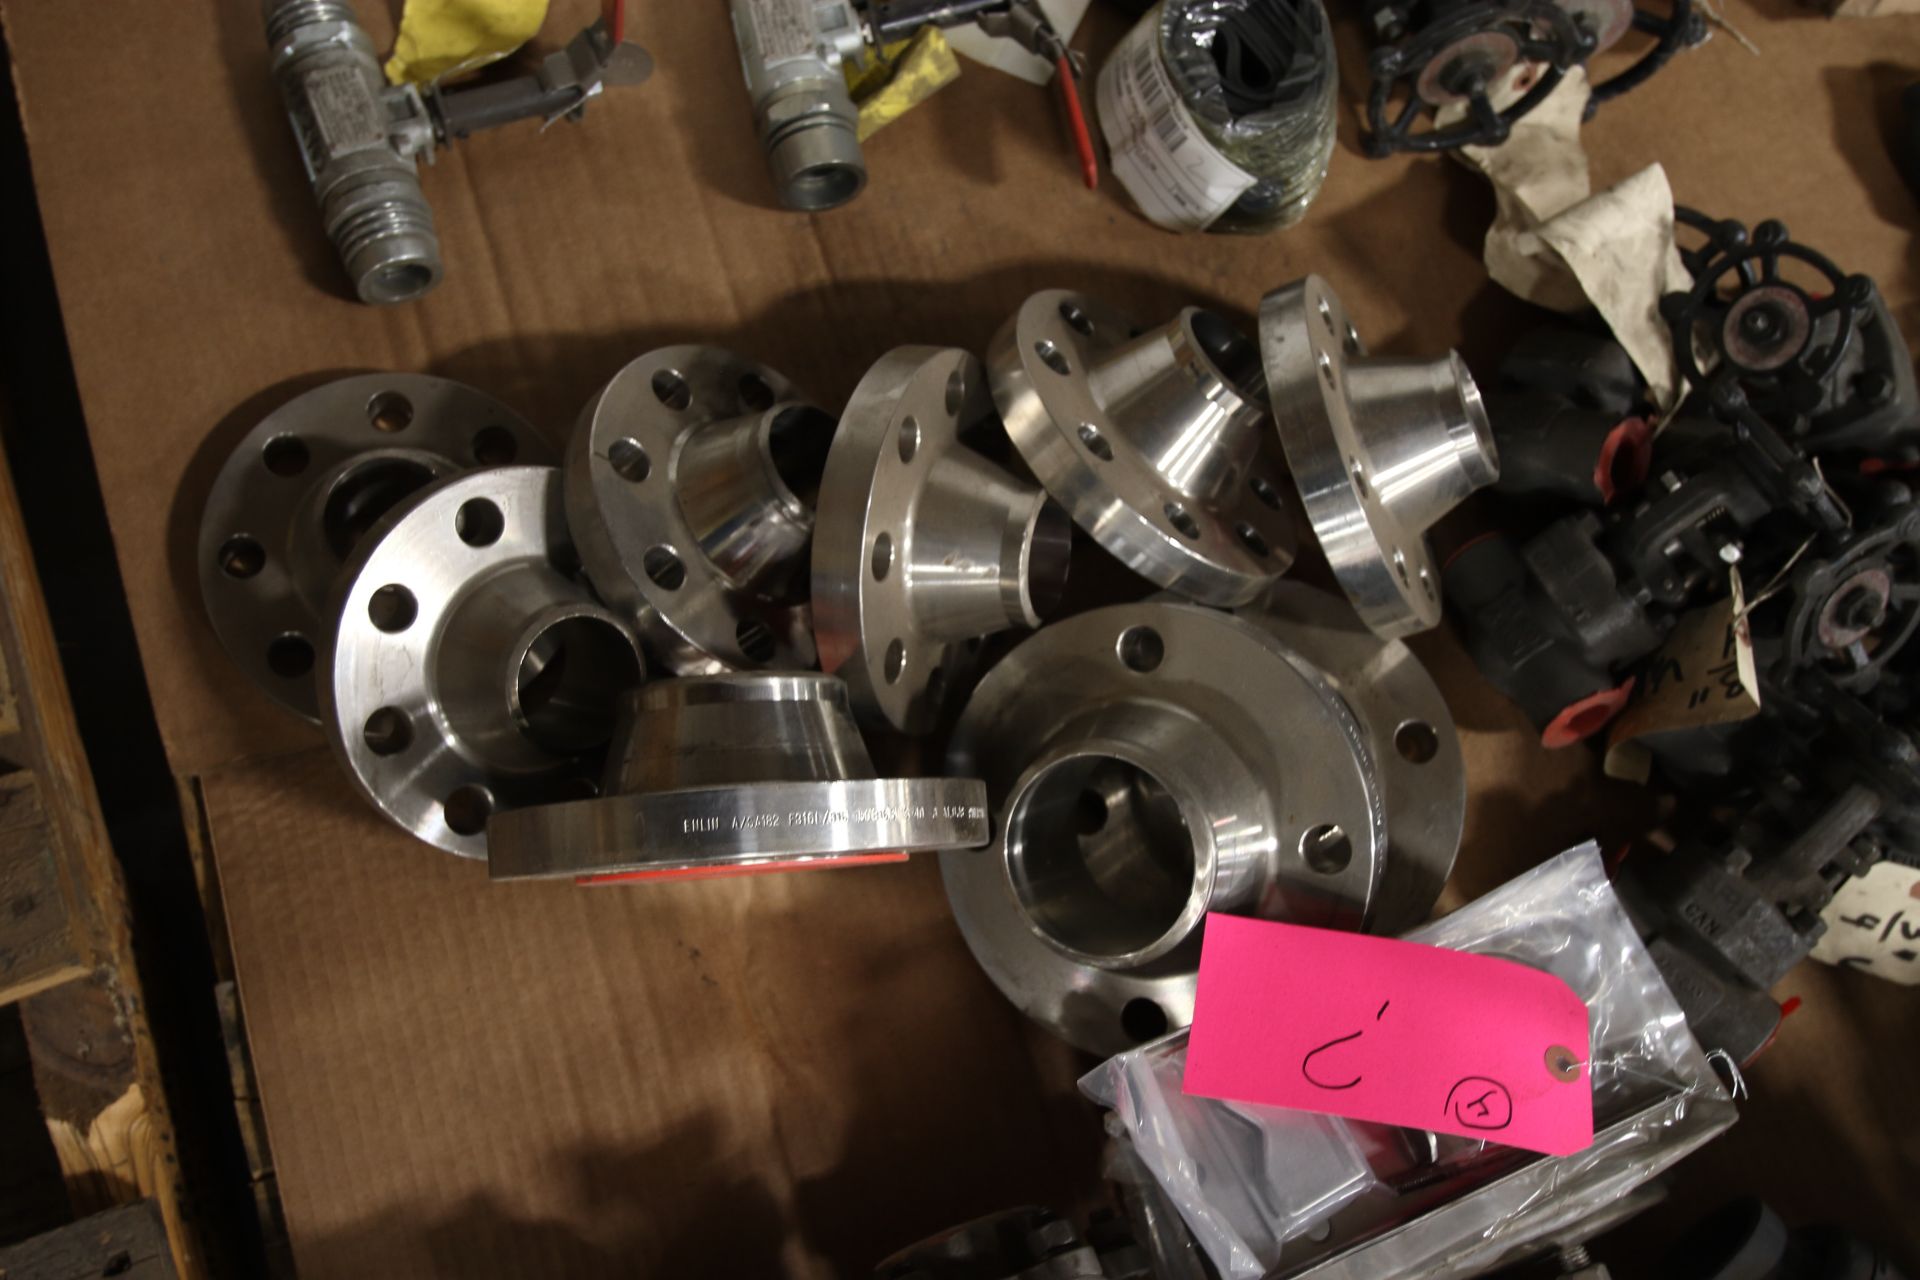 Flanges, Valves ( LOCATION 4: 850 AEROPLAZA DR, COLORADO SPRINGS, CO 80916 ) - Image 2 of 4